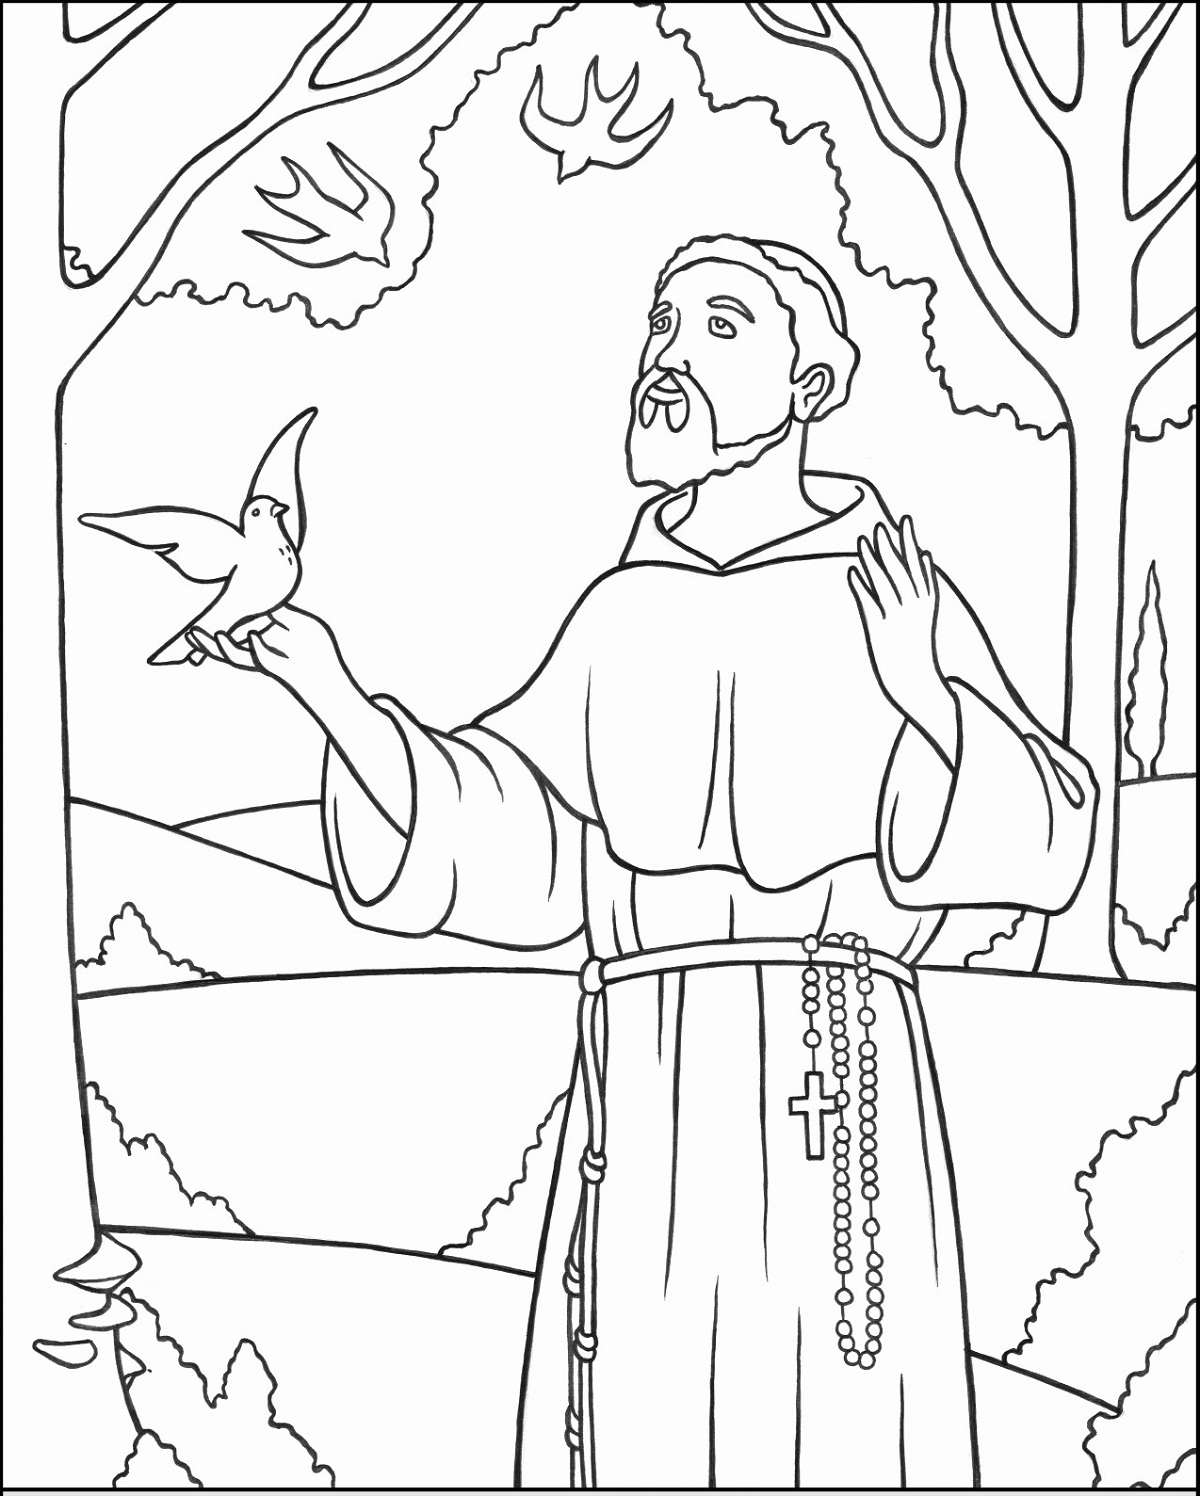 All Saints Day Coloring Page Activity Shelter